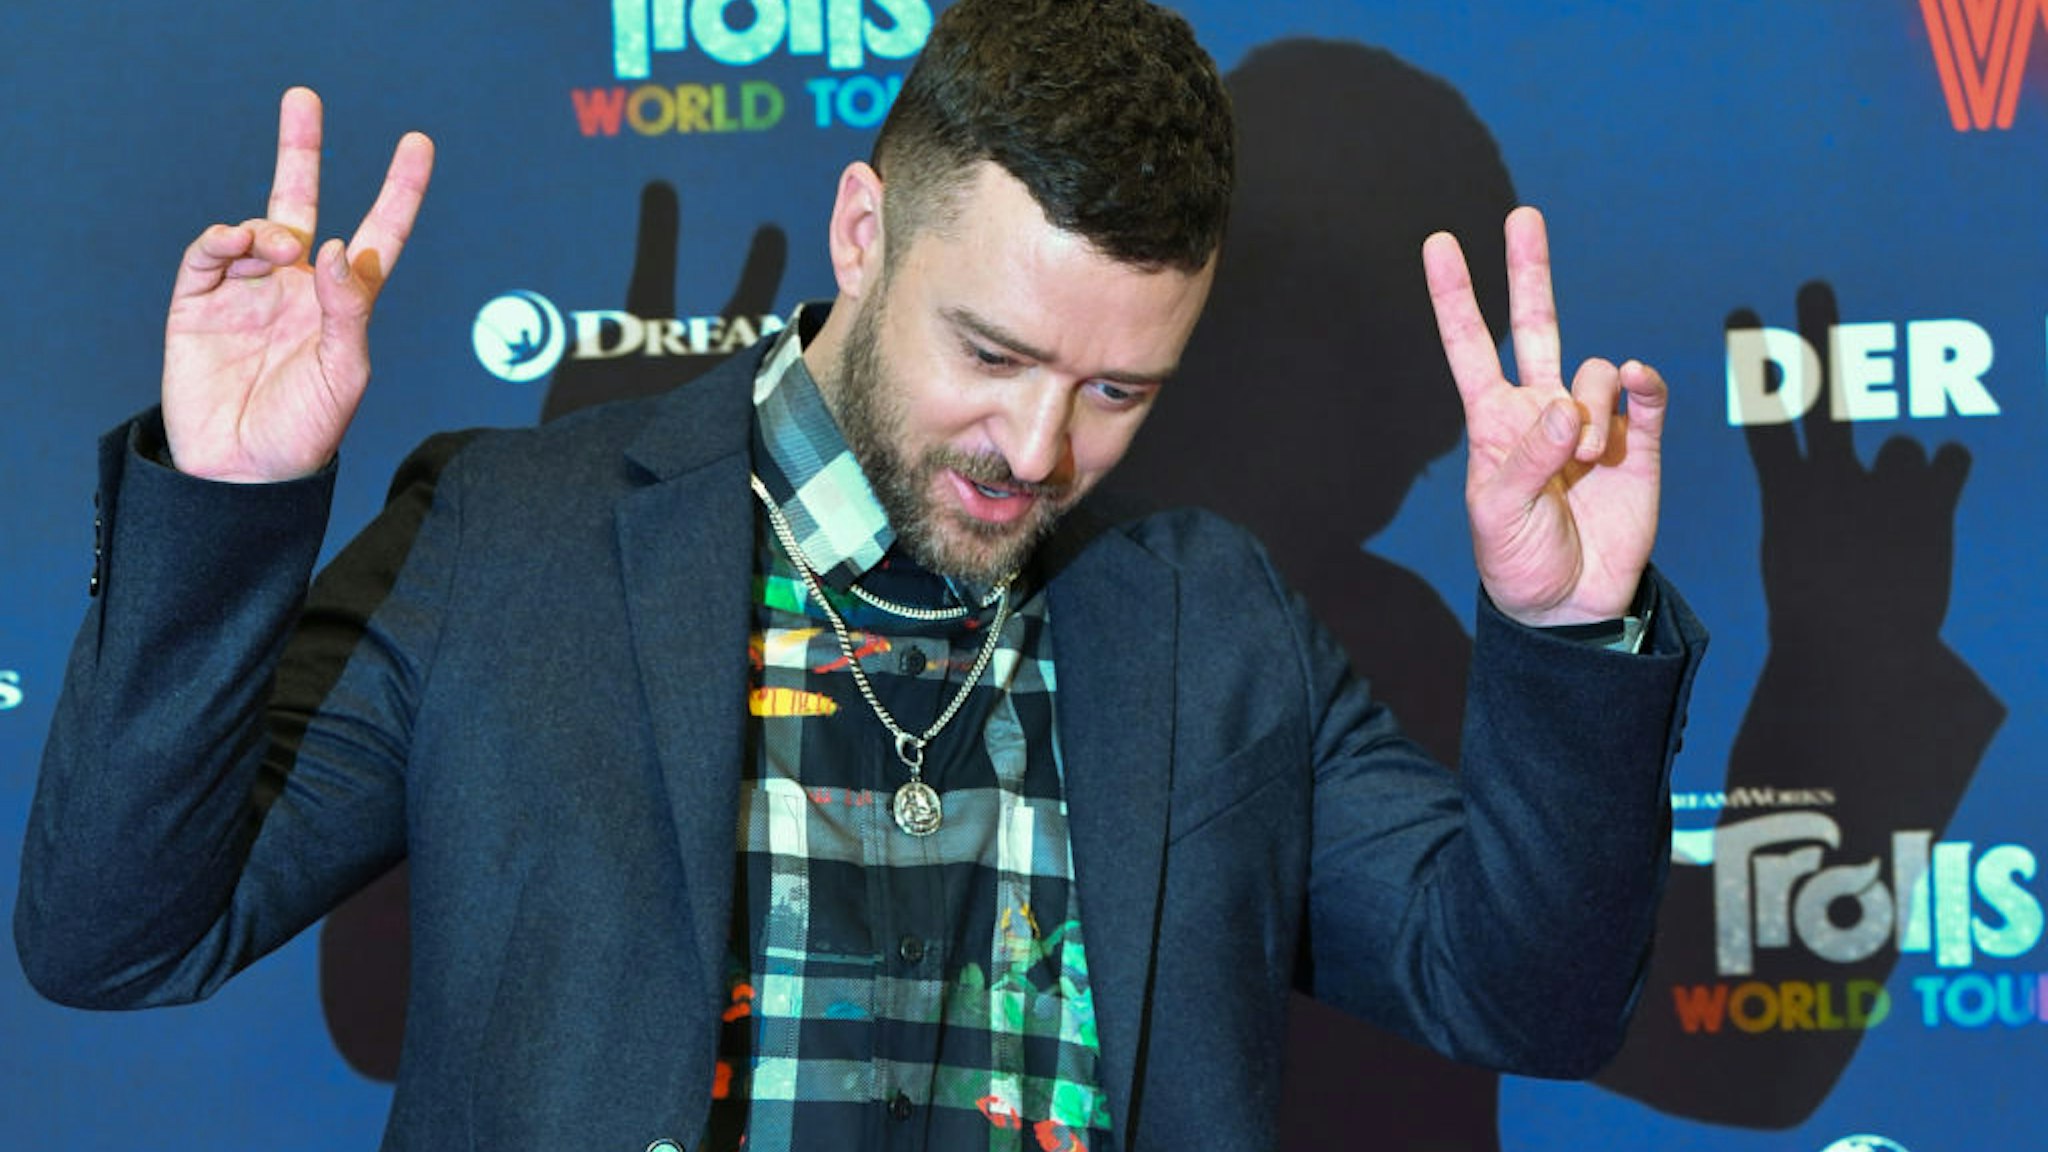 Justin Timberlake, actor and musician, is at the photo shoot for the movie "Trolls World Tour" at the Hotel Waldorf Astoria.